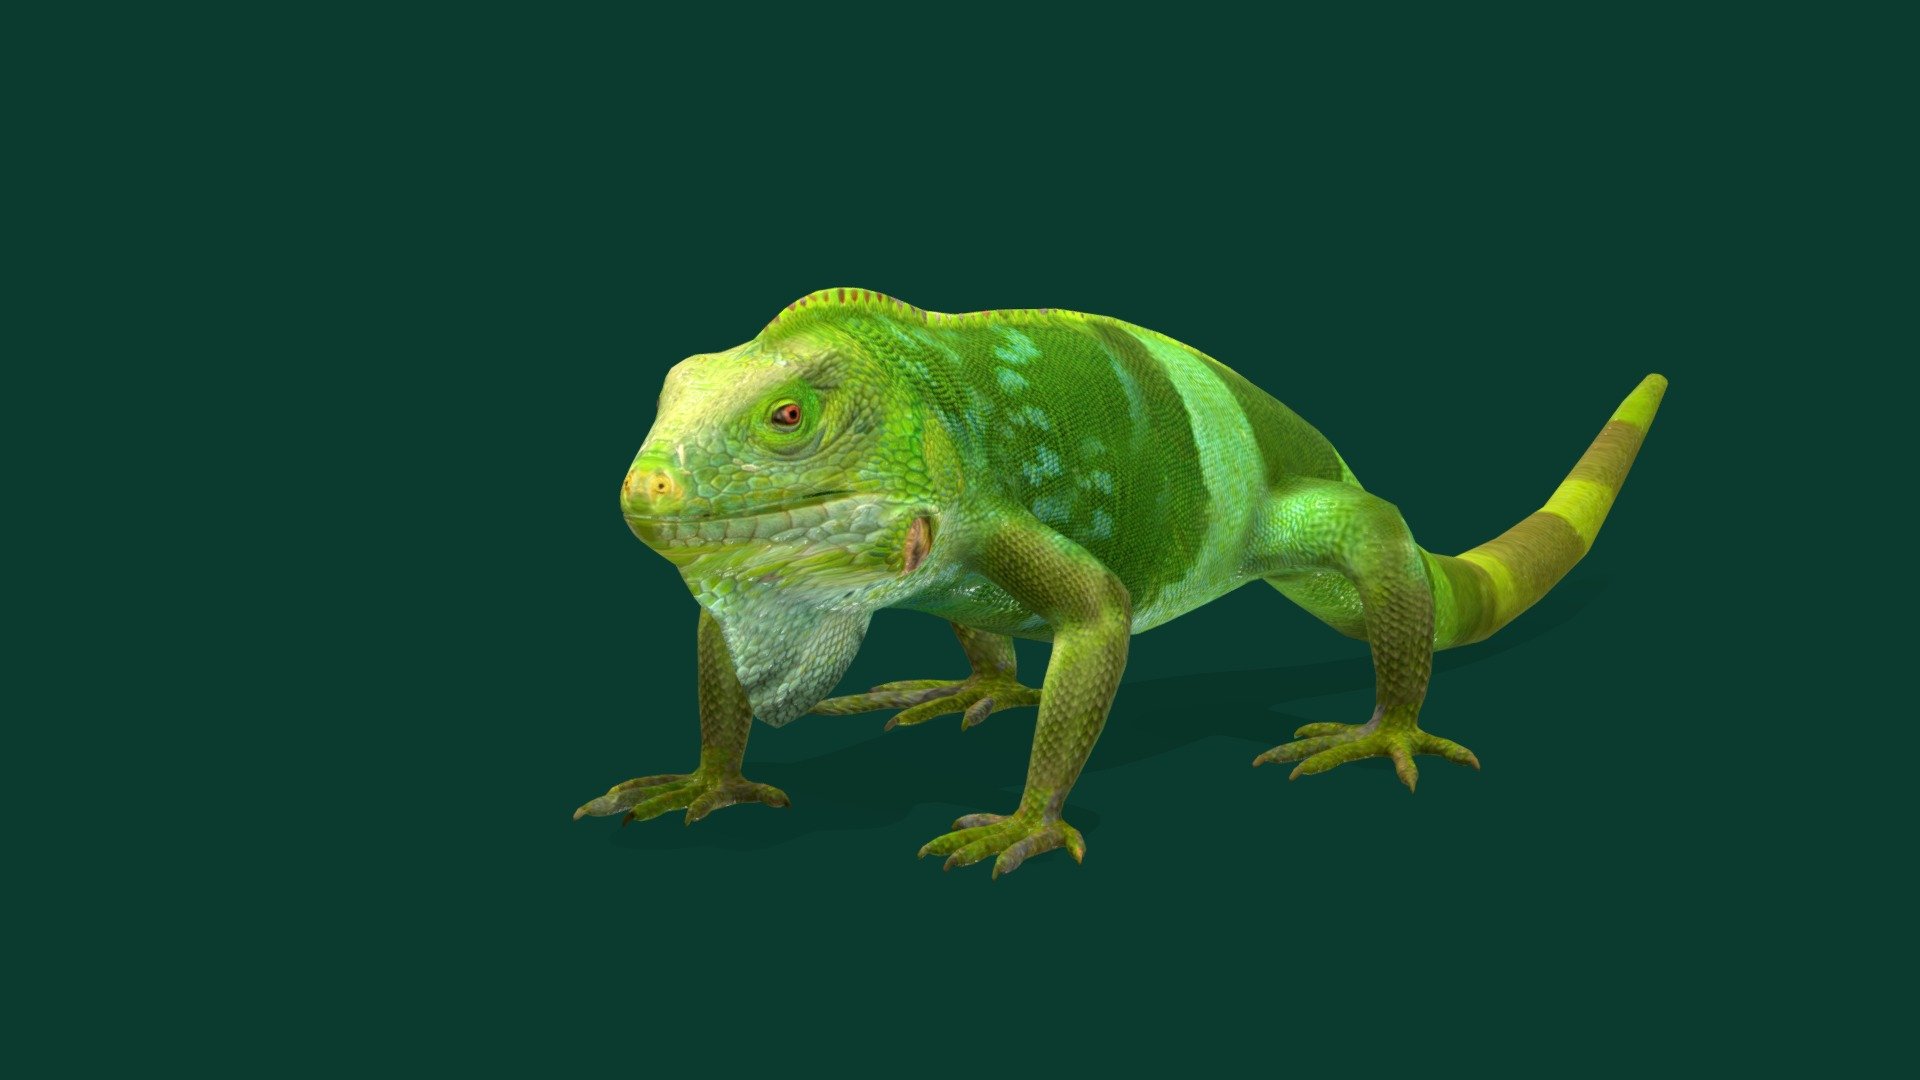 Fiji_Banded_Iguana (endangered Fiji banded iguana) 

Brachylophus_fasciatus Animal Reptile (  Lau_banded_iguana ) Iguanidae

1 Draw Calls

Gameready 

Lowpoly 

16 Animations

4K PBR Textures Material

Unreal FBX

Unity FBX  

Blend File 

USDZ File (AR Ready). Real Scale Dimension

Textures Files

GLB File


Gltf File ( Spark AR, Lens Studio(SnapChat) , Effector(Tiktok) , Spline, Play Canvas ) Compatible




Triangles : 7408



Vertices  : 3735

Faces     : 3736

Edges     : 7466

Diffuse 32 bit, Metallic, Roughness , Normal Map ,Specular Map,AO,Height Map - Fiji Banded Iguana Endangered (Lowpoly) - 3D model by Nyilonelycompany 3d model